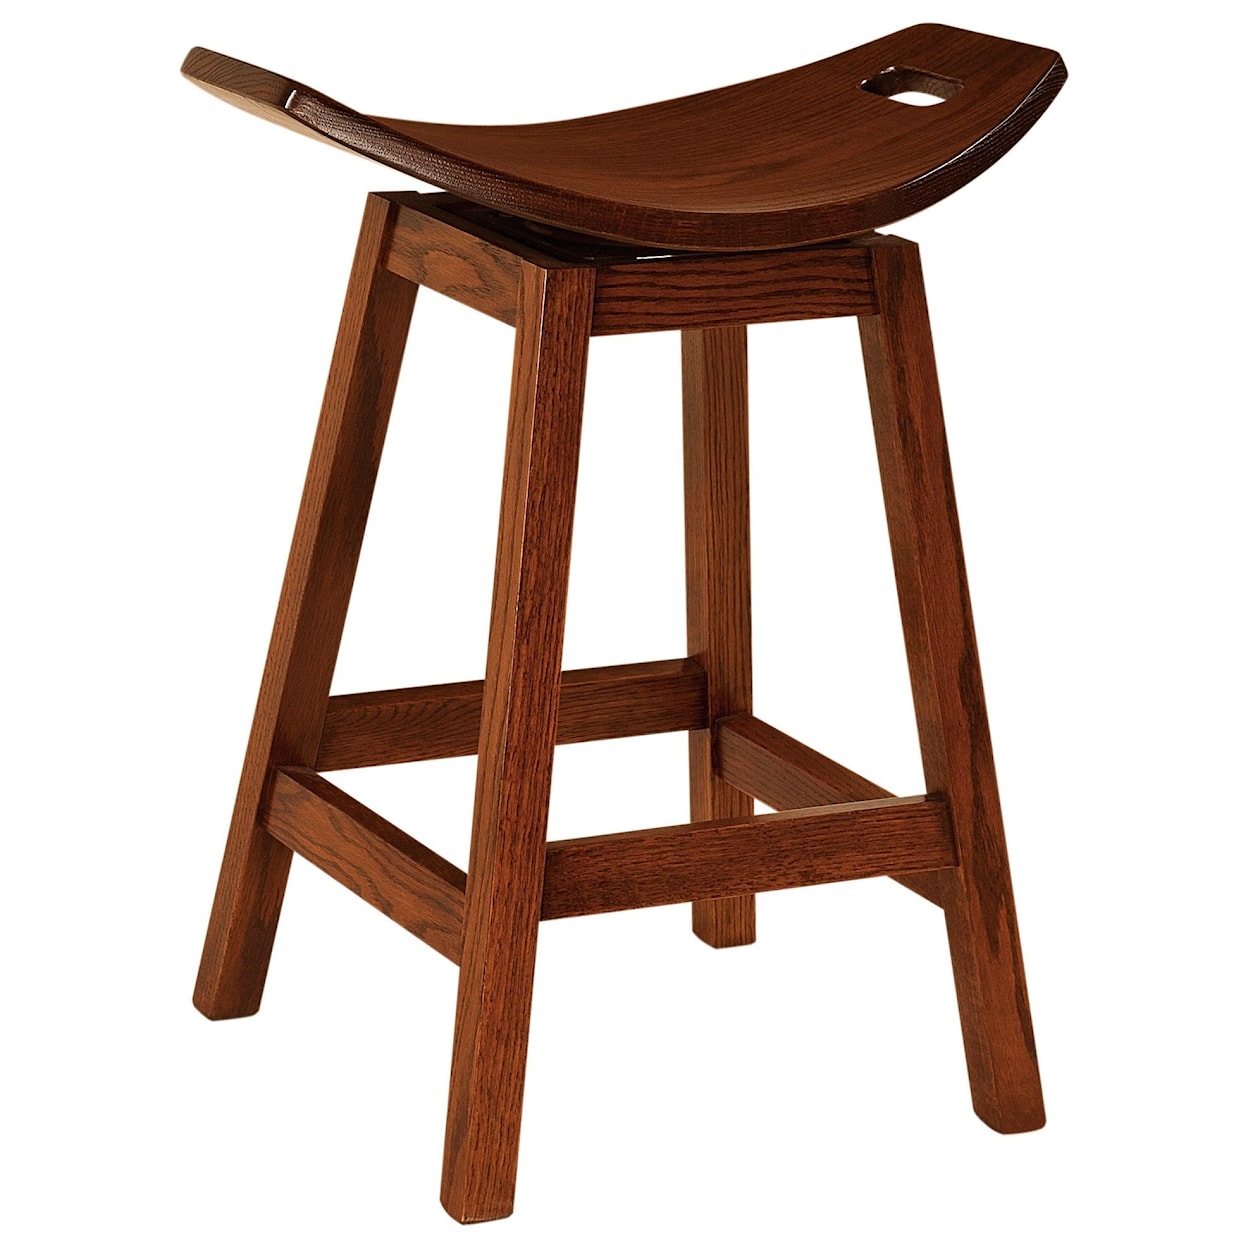 F&N Woodworking Wilford Stationary Bar Stool 24" Height - Wood Seat